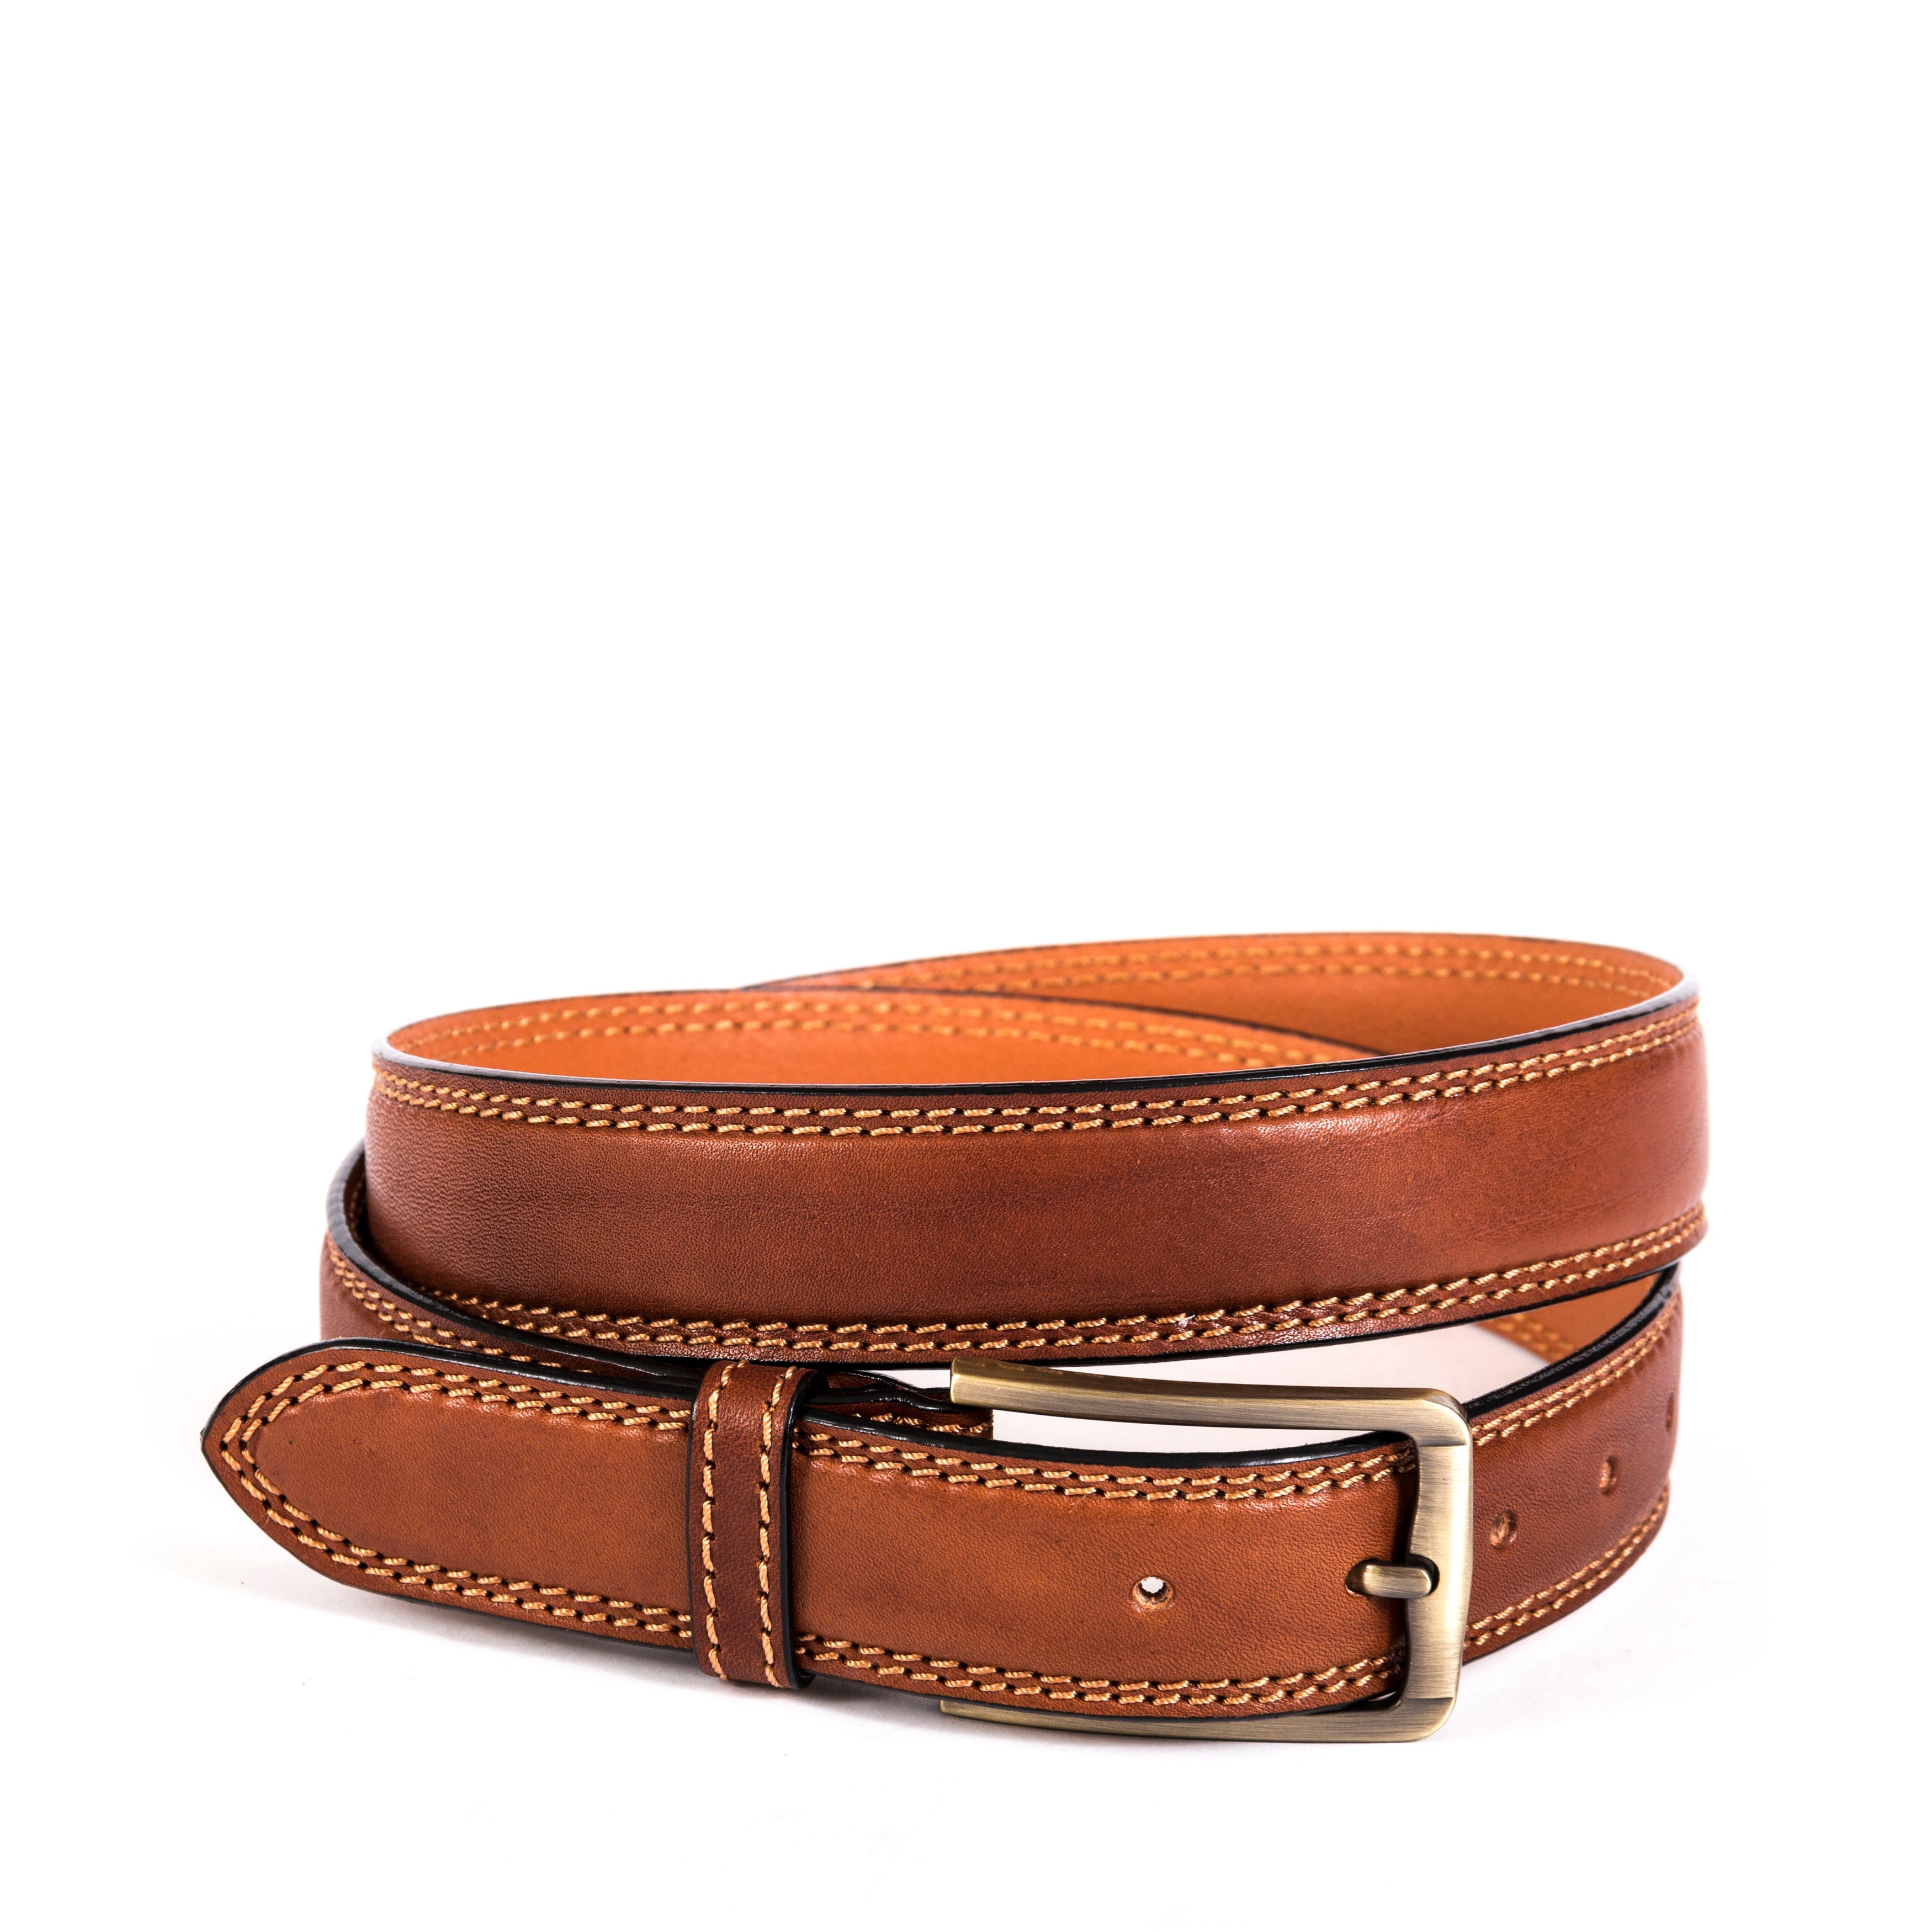 Gianni Conti Devon Vegetable-Tanned Leather Belt